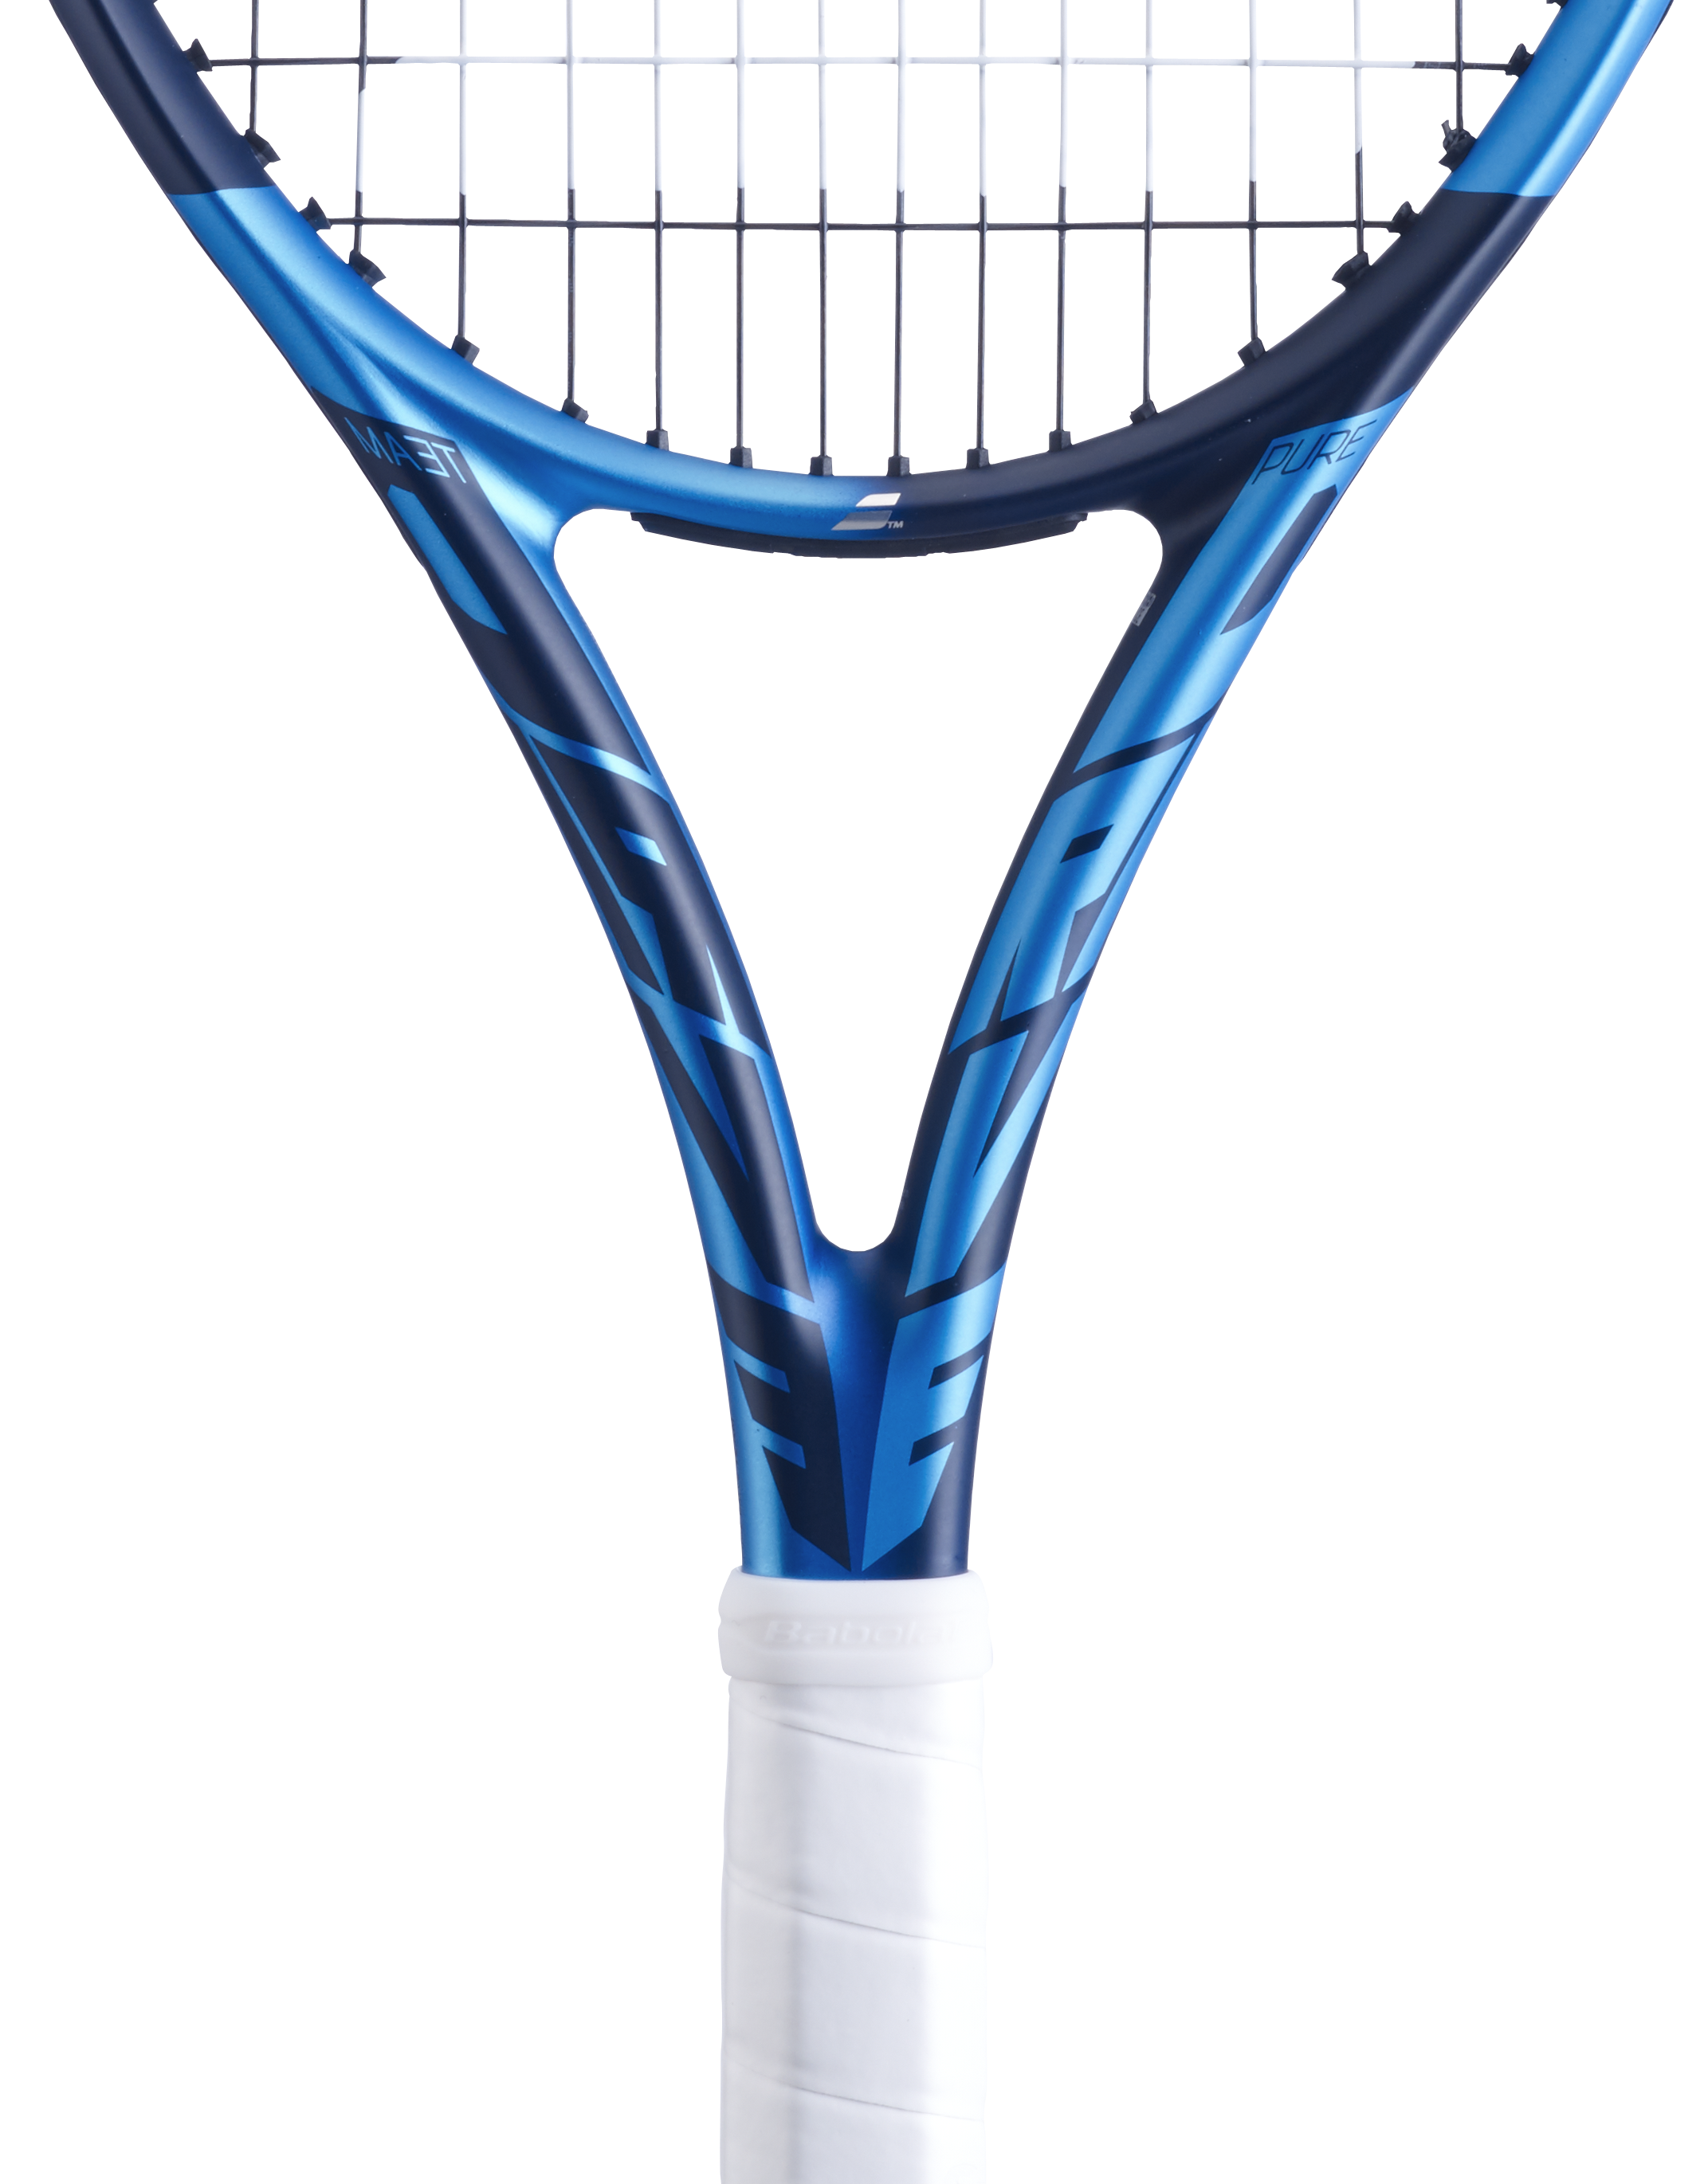 Equipe Babolat Pure Drive (2021)